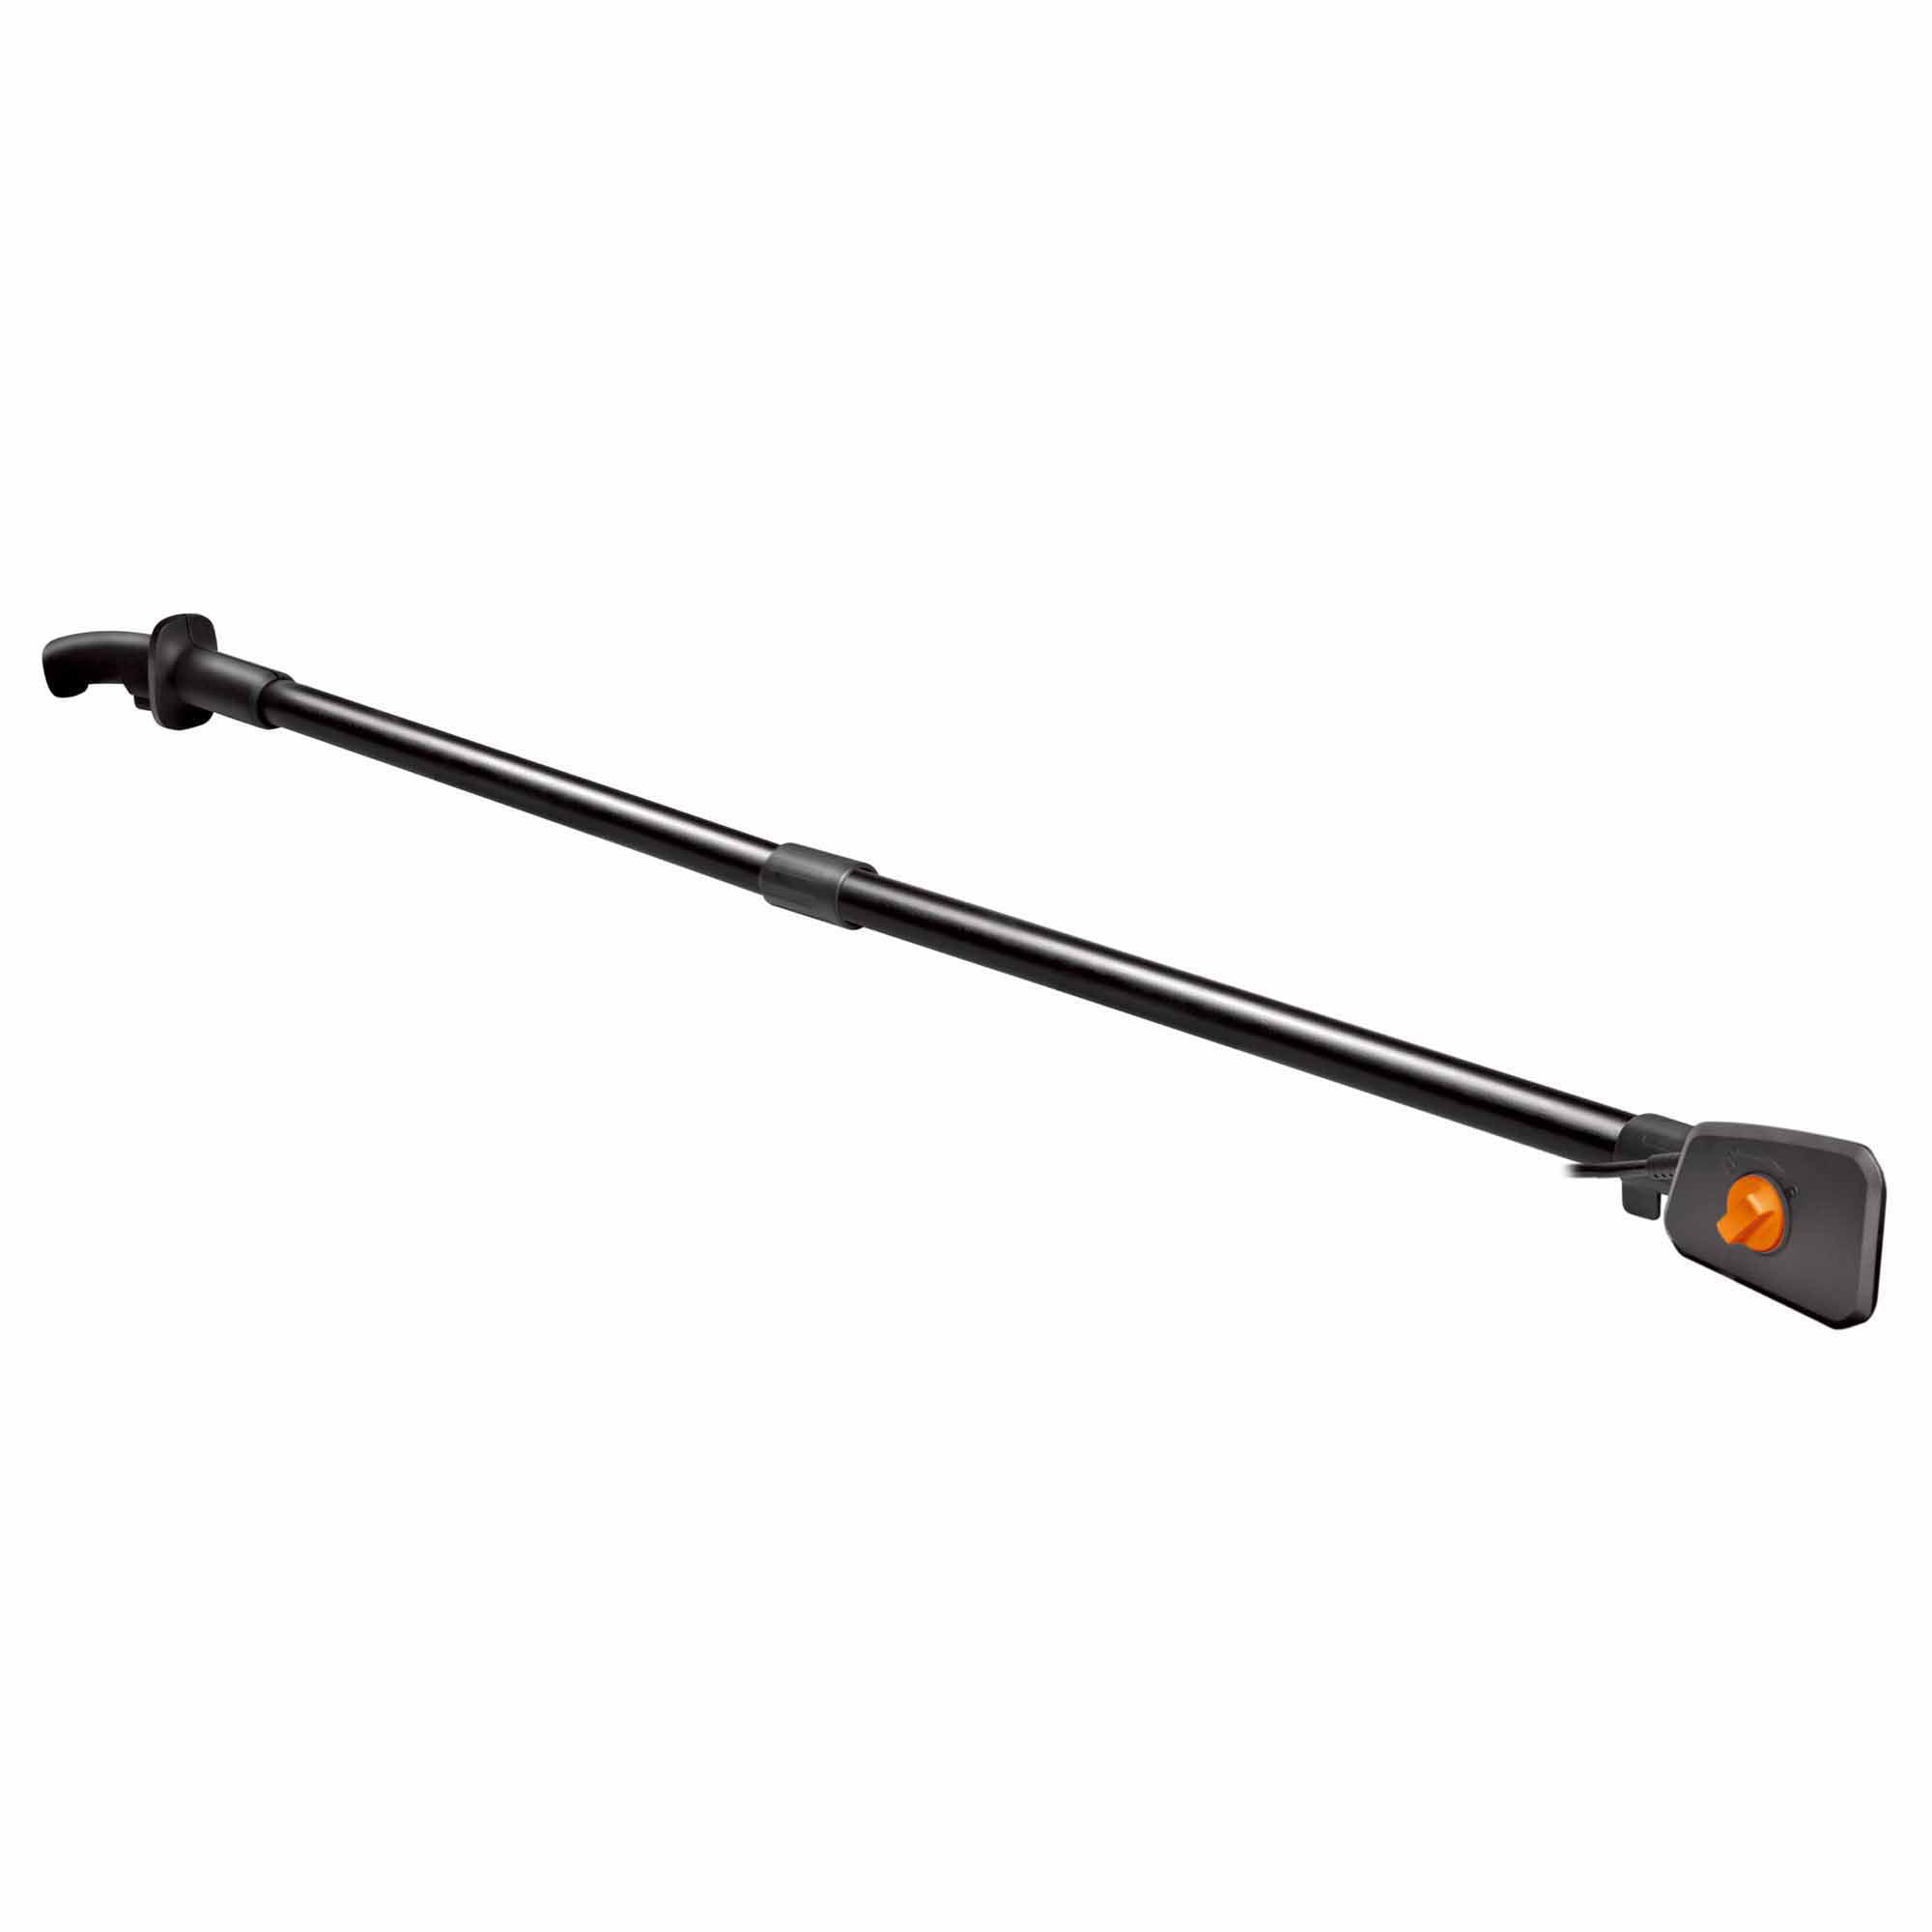 WORX WG310 8 Amp 8" 2-In-1 Electric Pole Saw & Chainsaw with Auto-Tension 